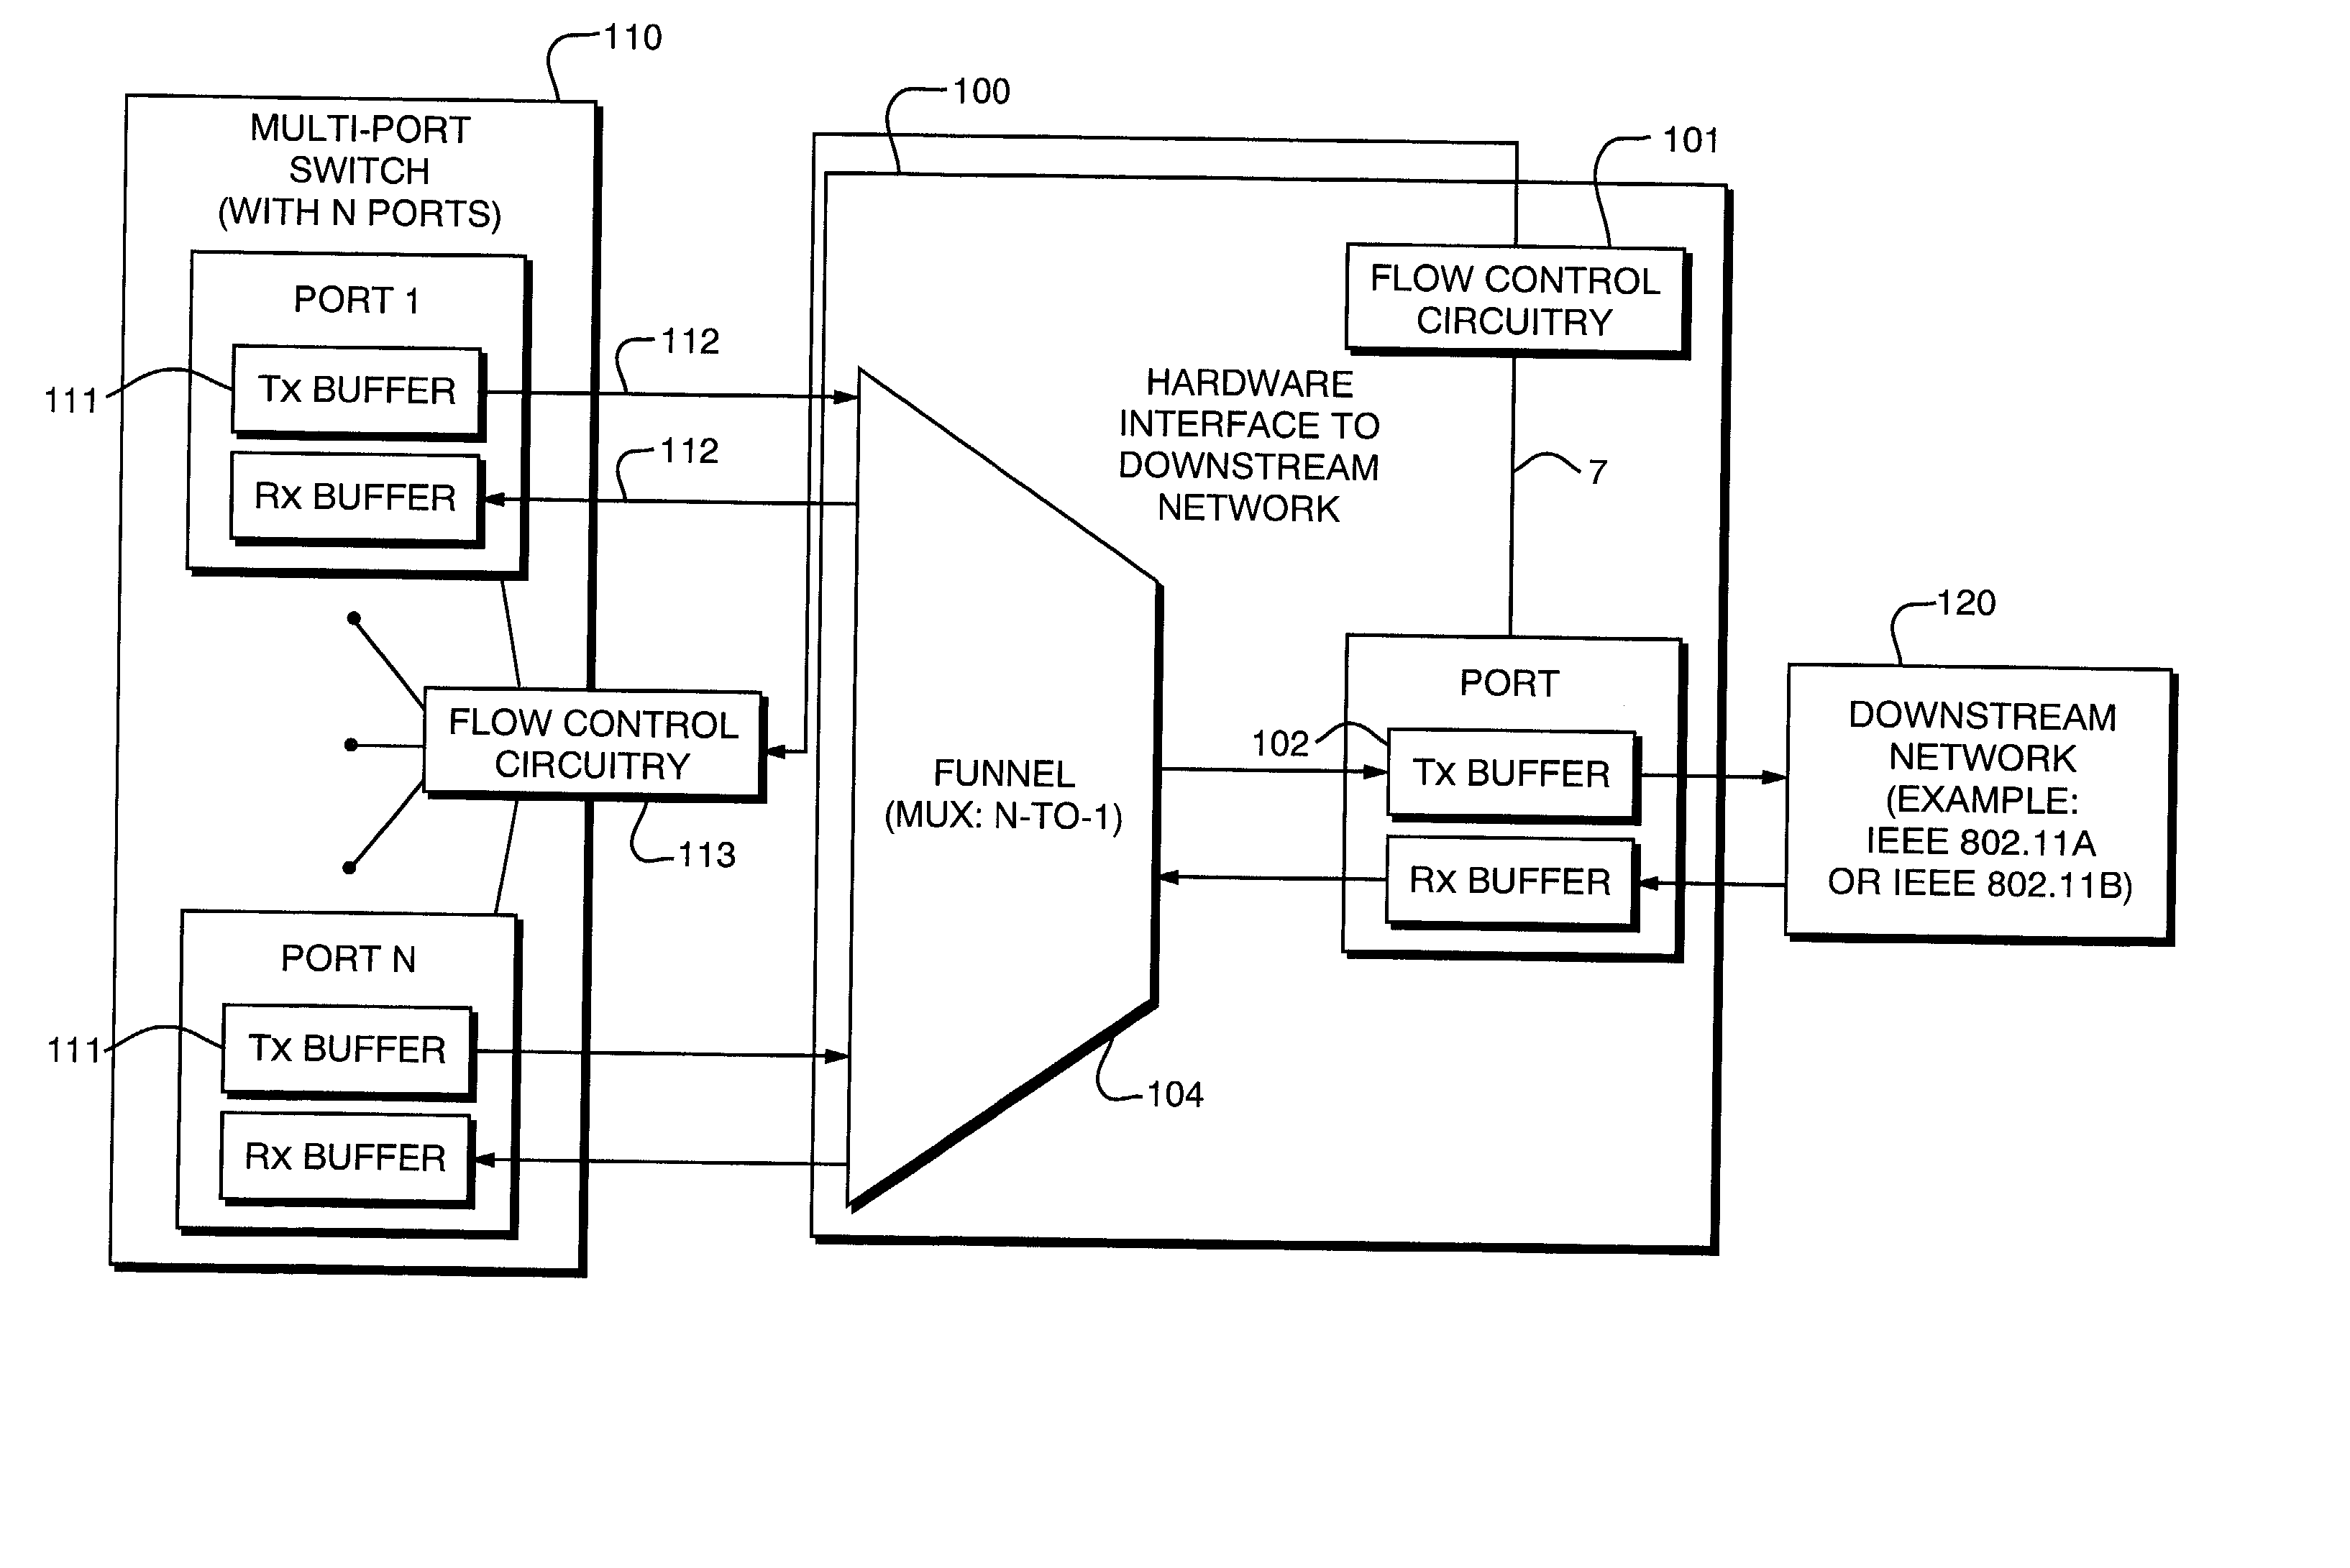 Flow control system to reduce memory buffer requirements and to establish priority servicing between networks